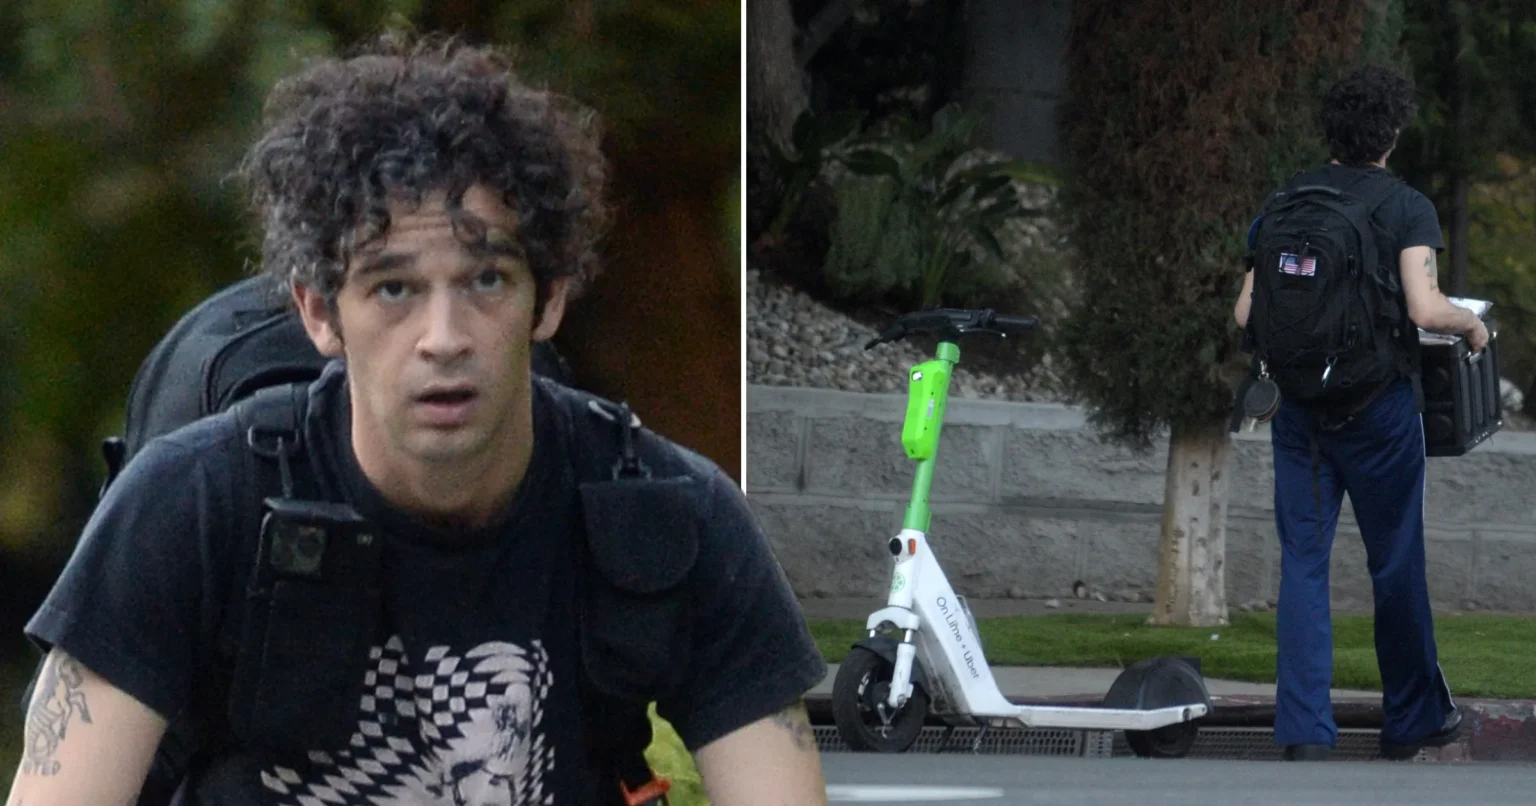 Matty Healy has unusual way of transporting belongings as he moves in with girlfriend after one month